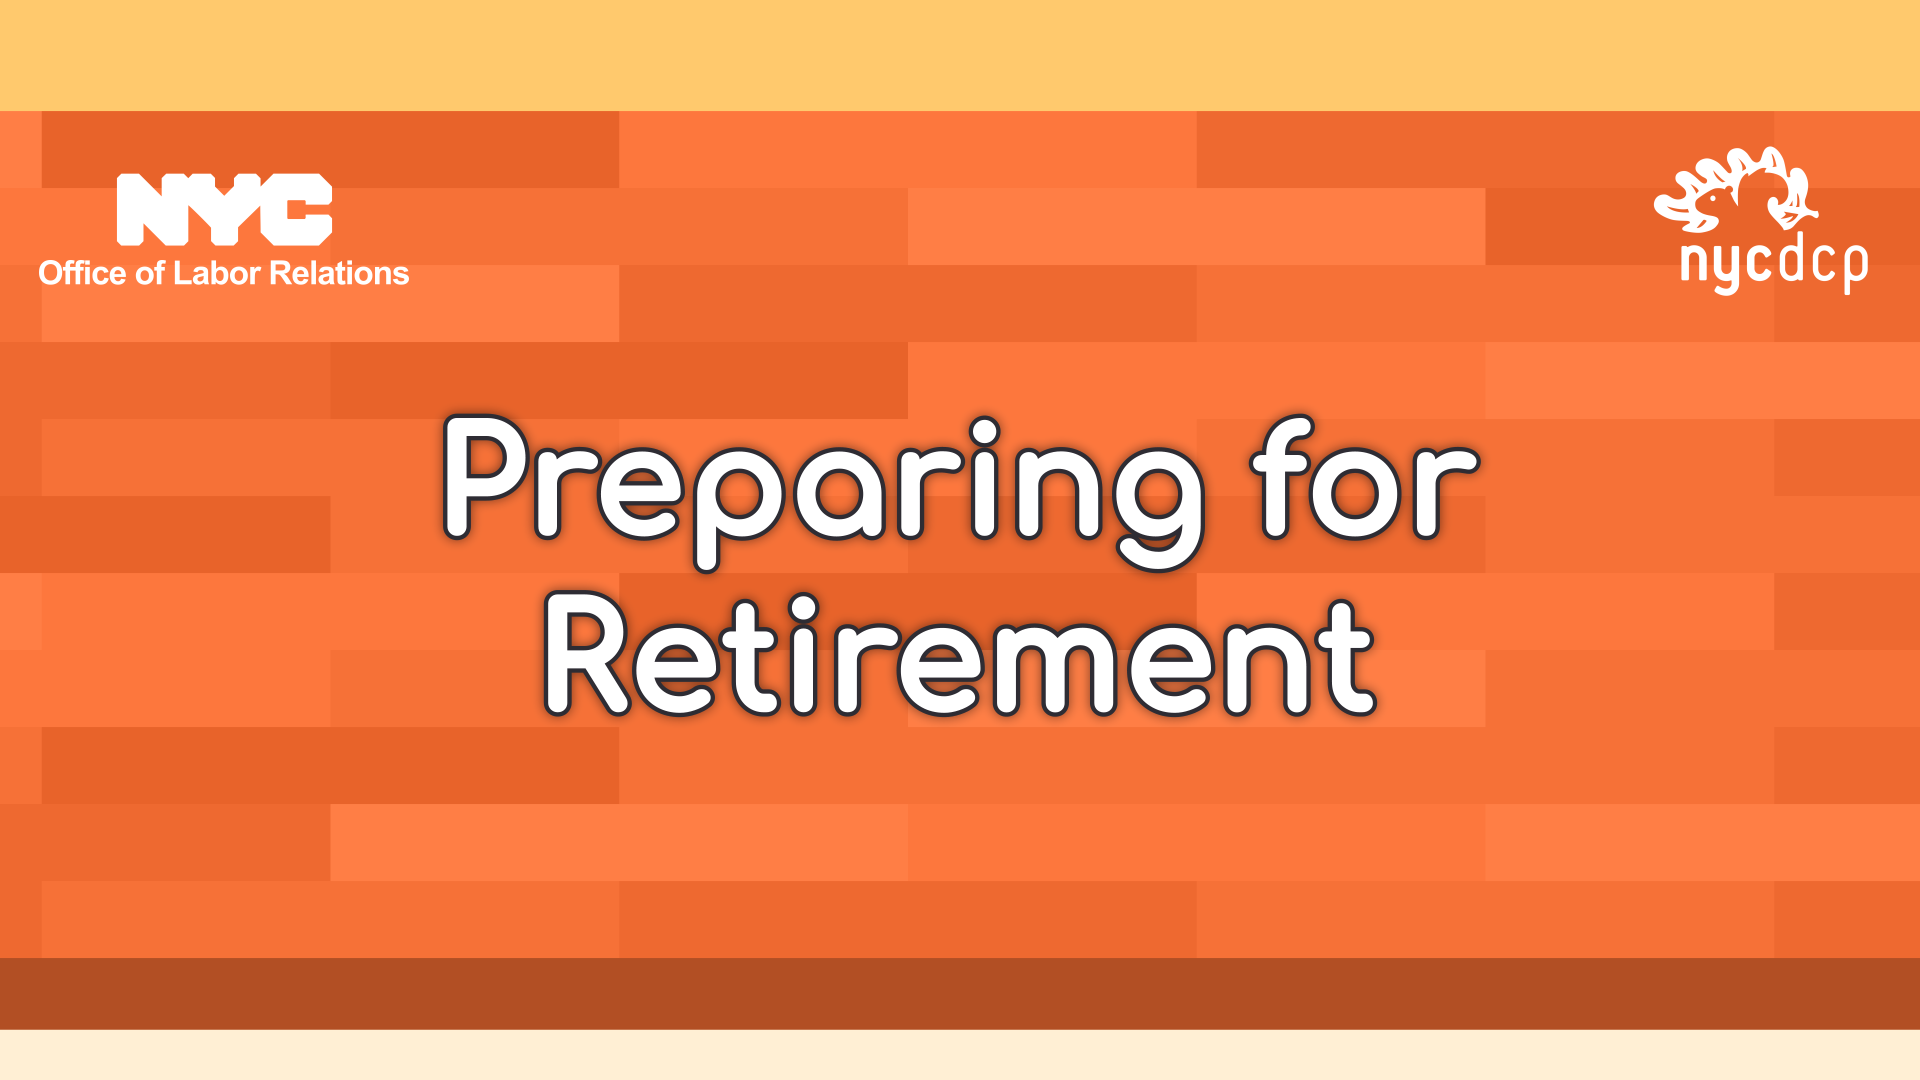 Grid background with the words "Preparing for Retirement"